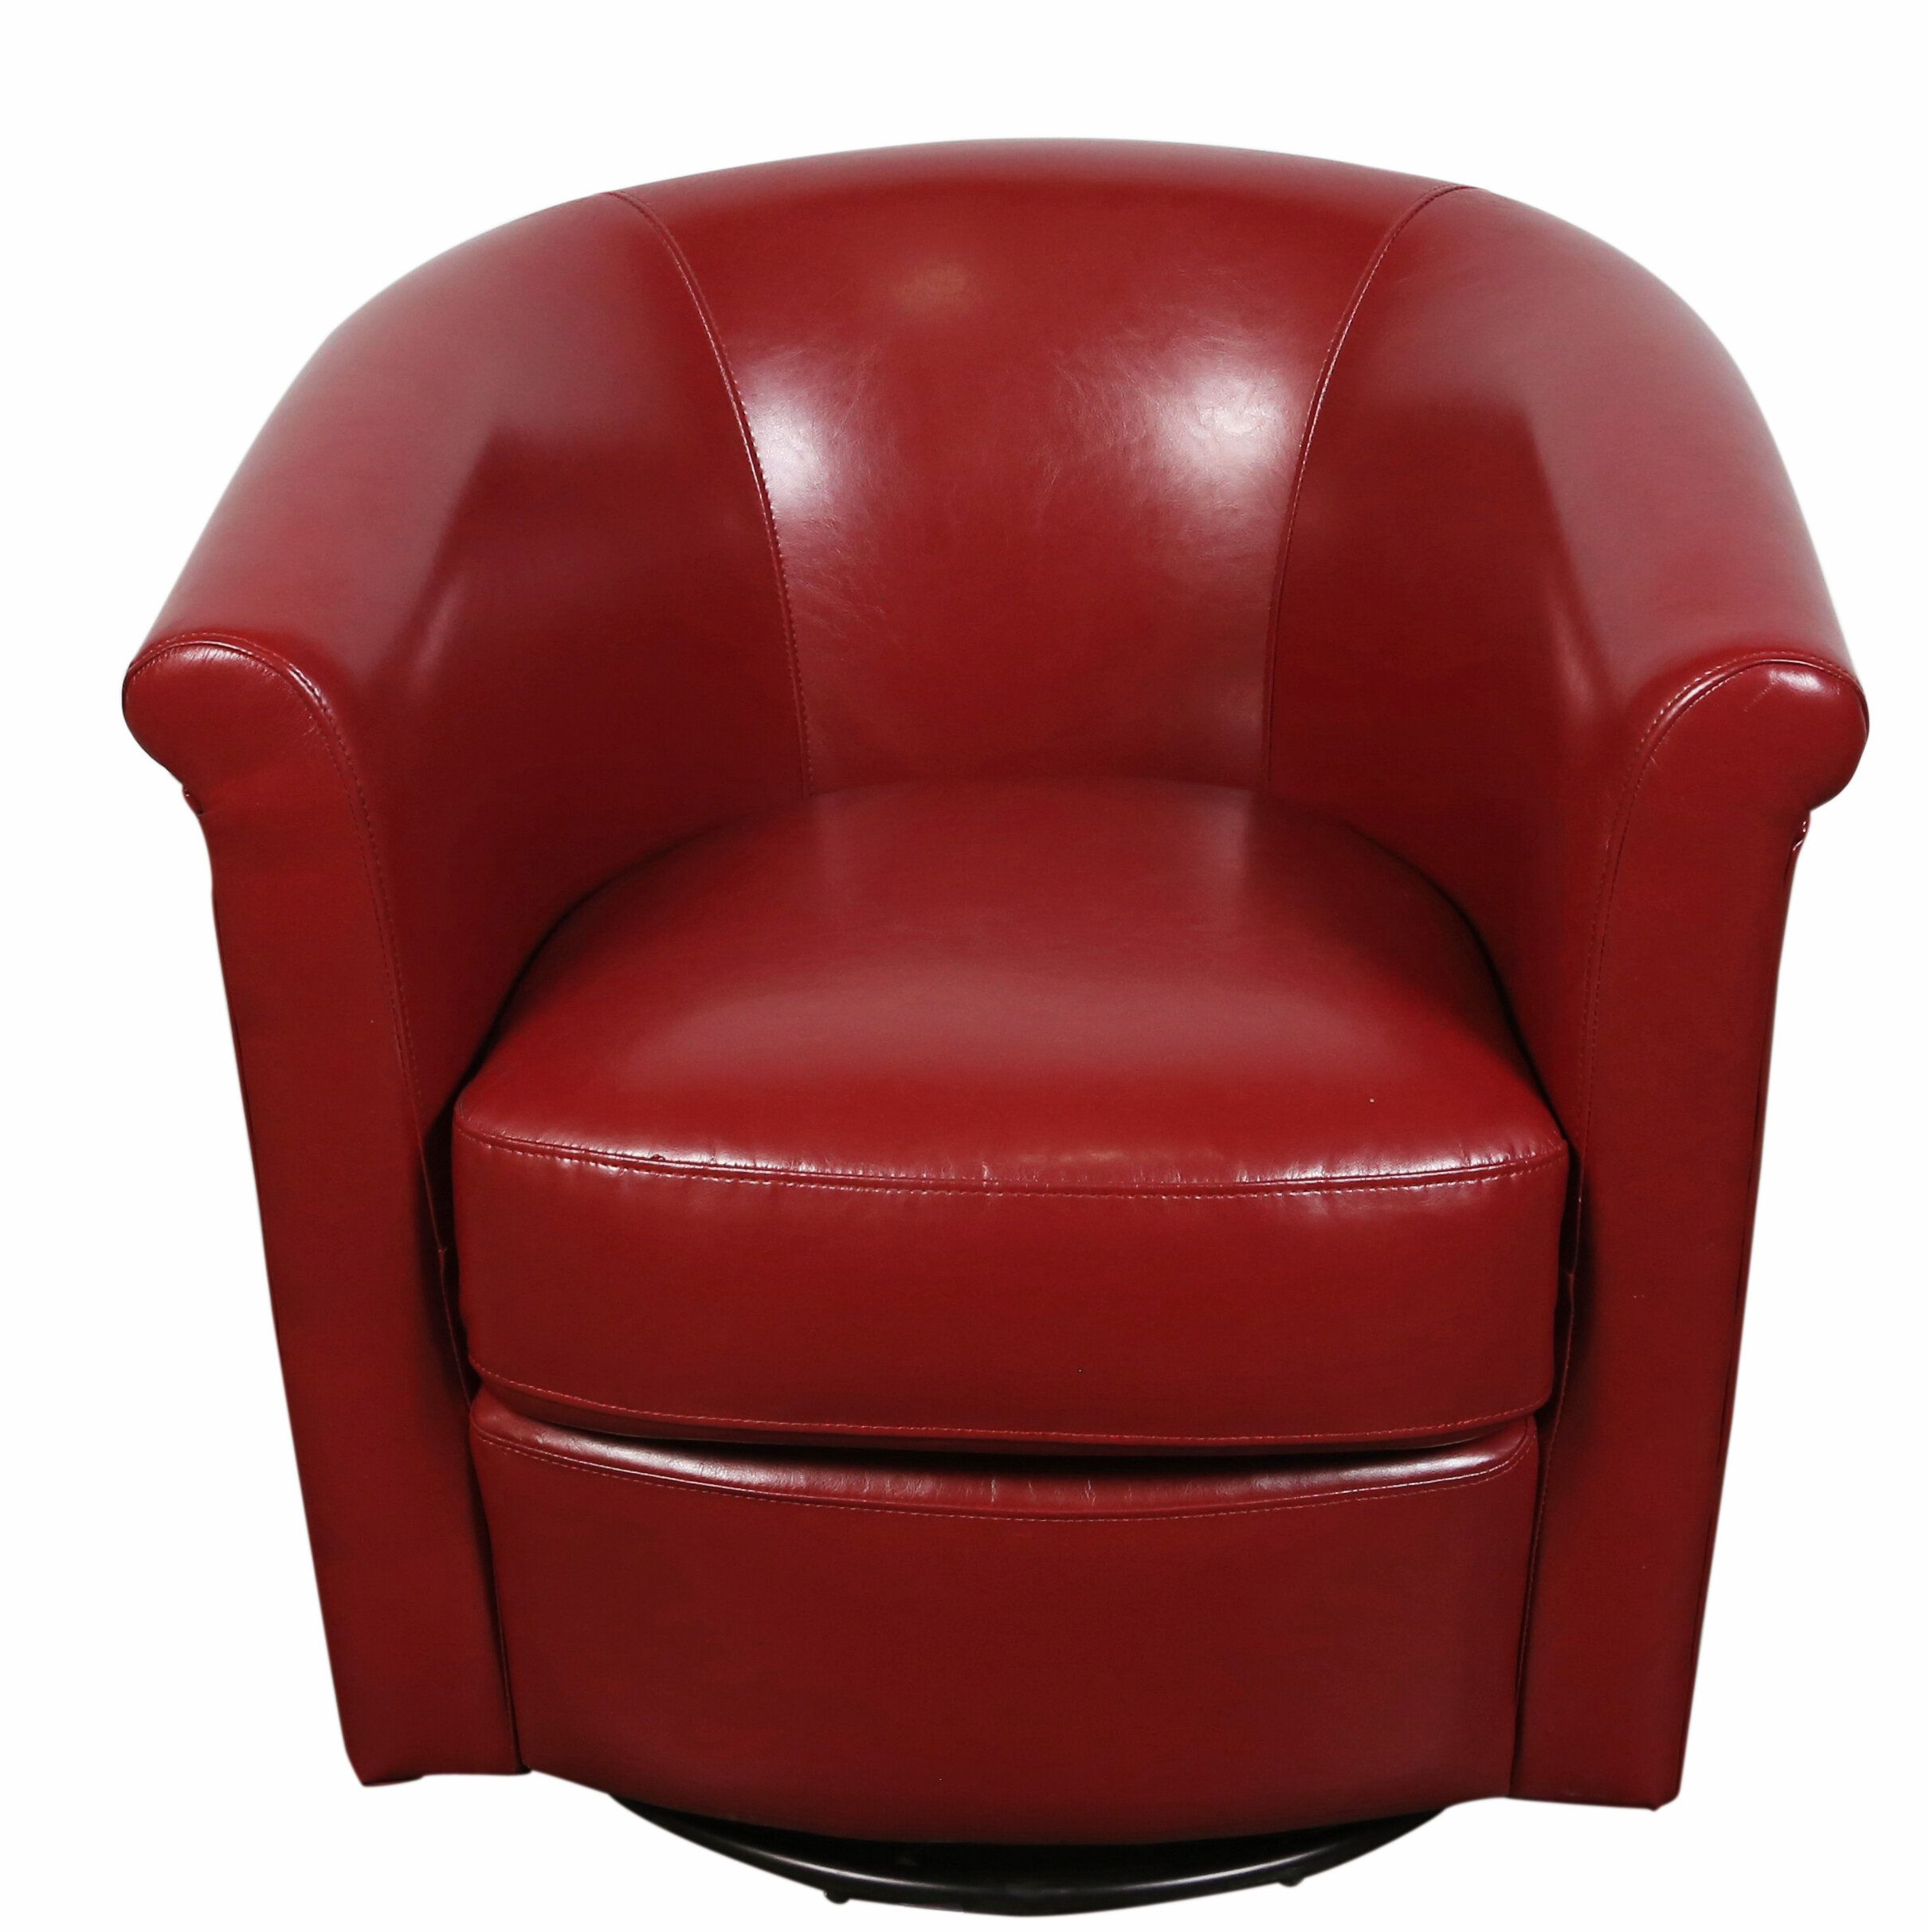 30" W Faux Leather Swivel Barrel Chair Intended For Ronda Barrel Chairs (Photo 11 of 15)